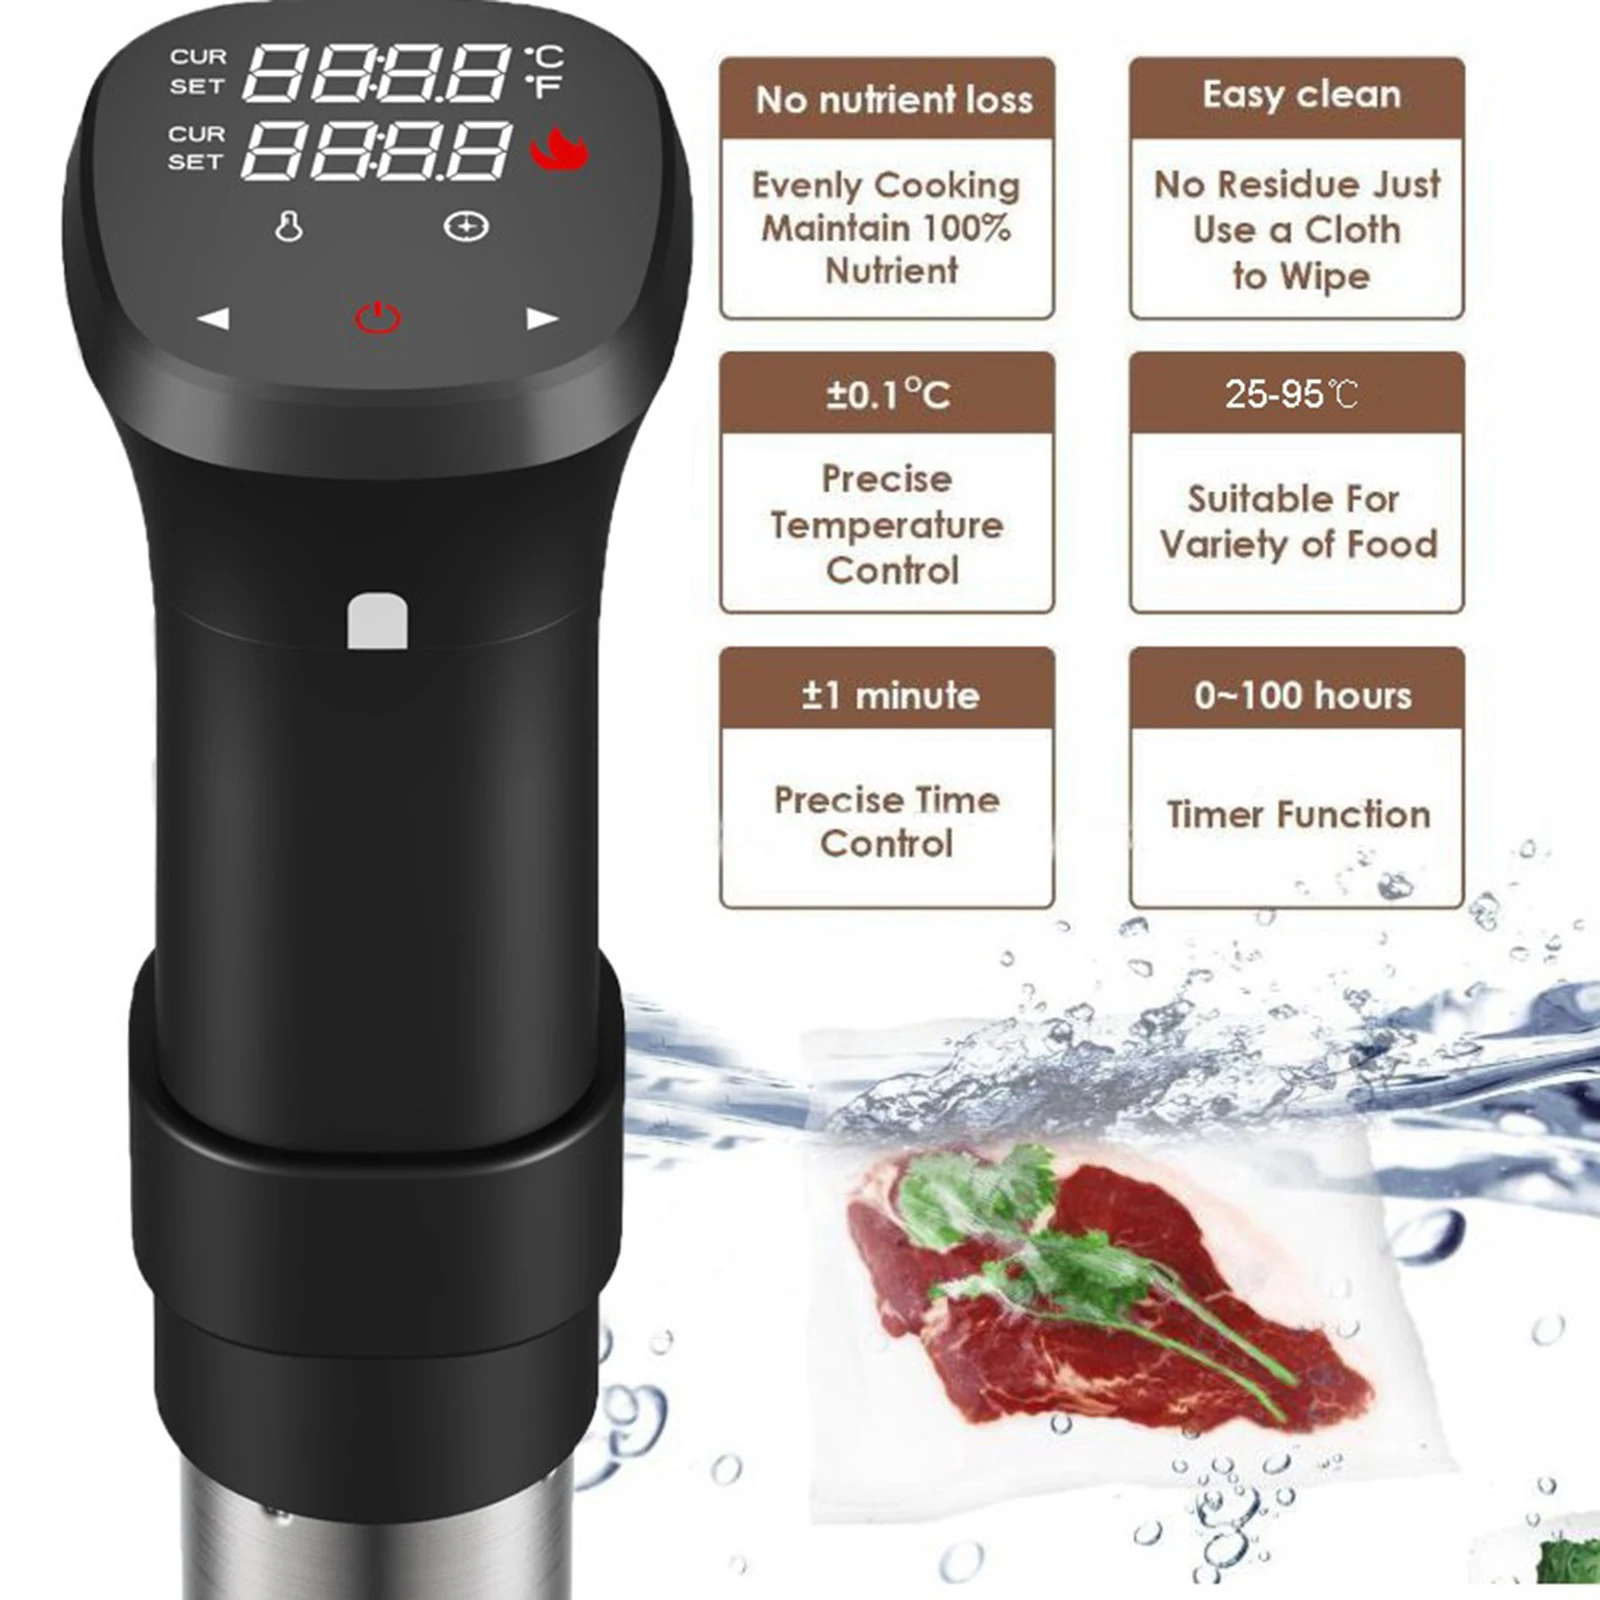  IPX7 Waterproof Sous Vide Precision Cooker Machine Slow Cooker with LCD Digital Accurate Control